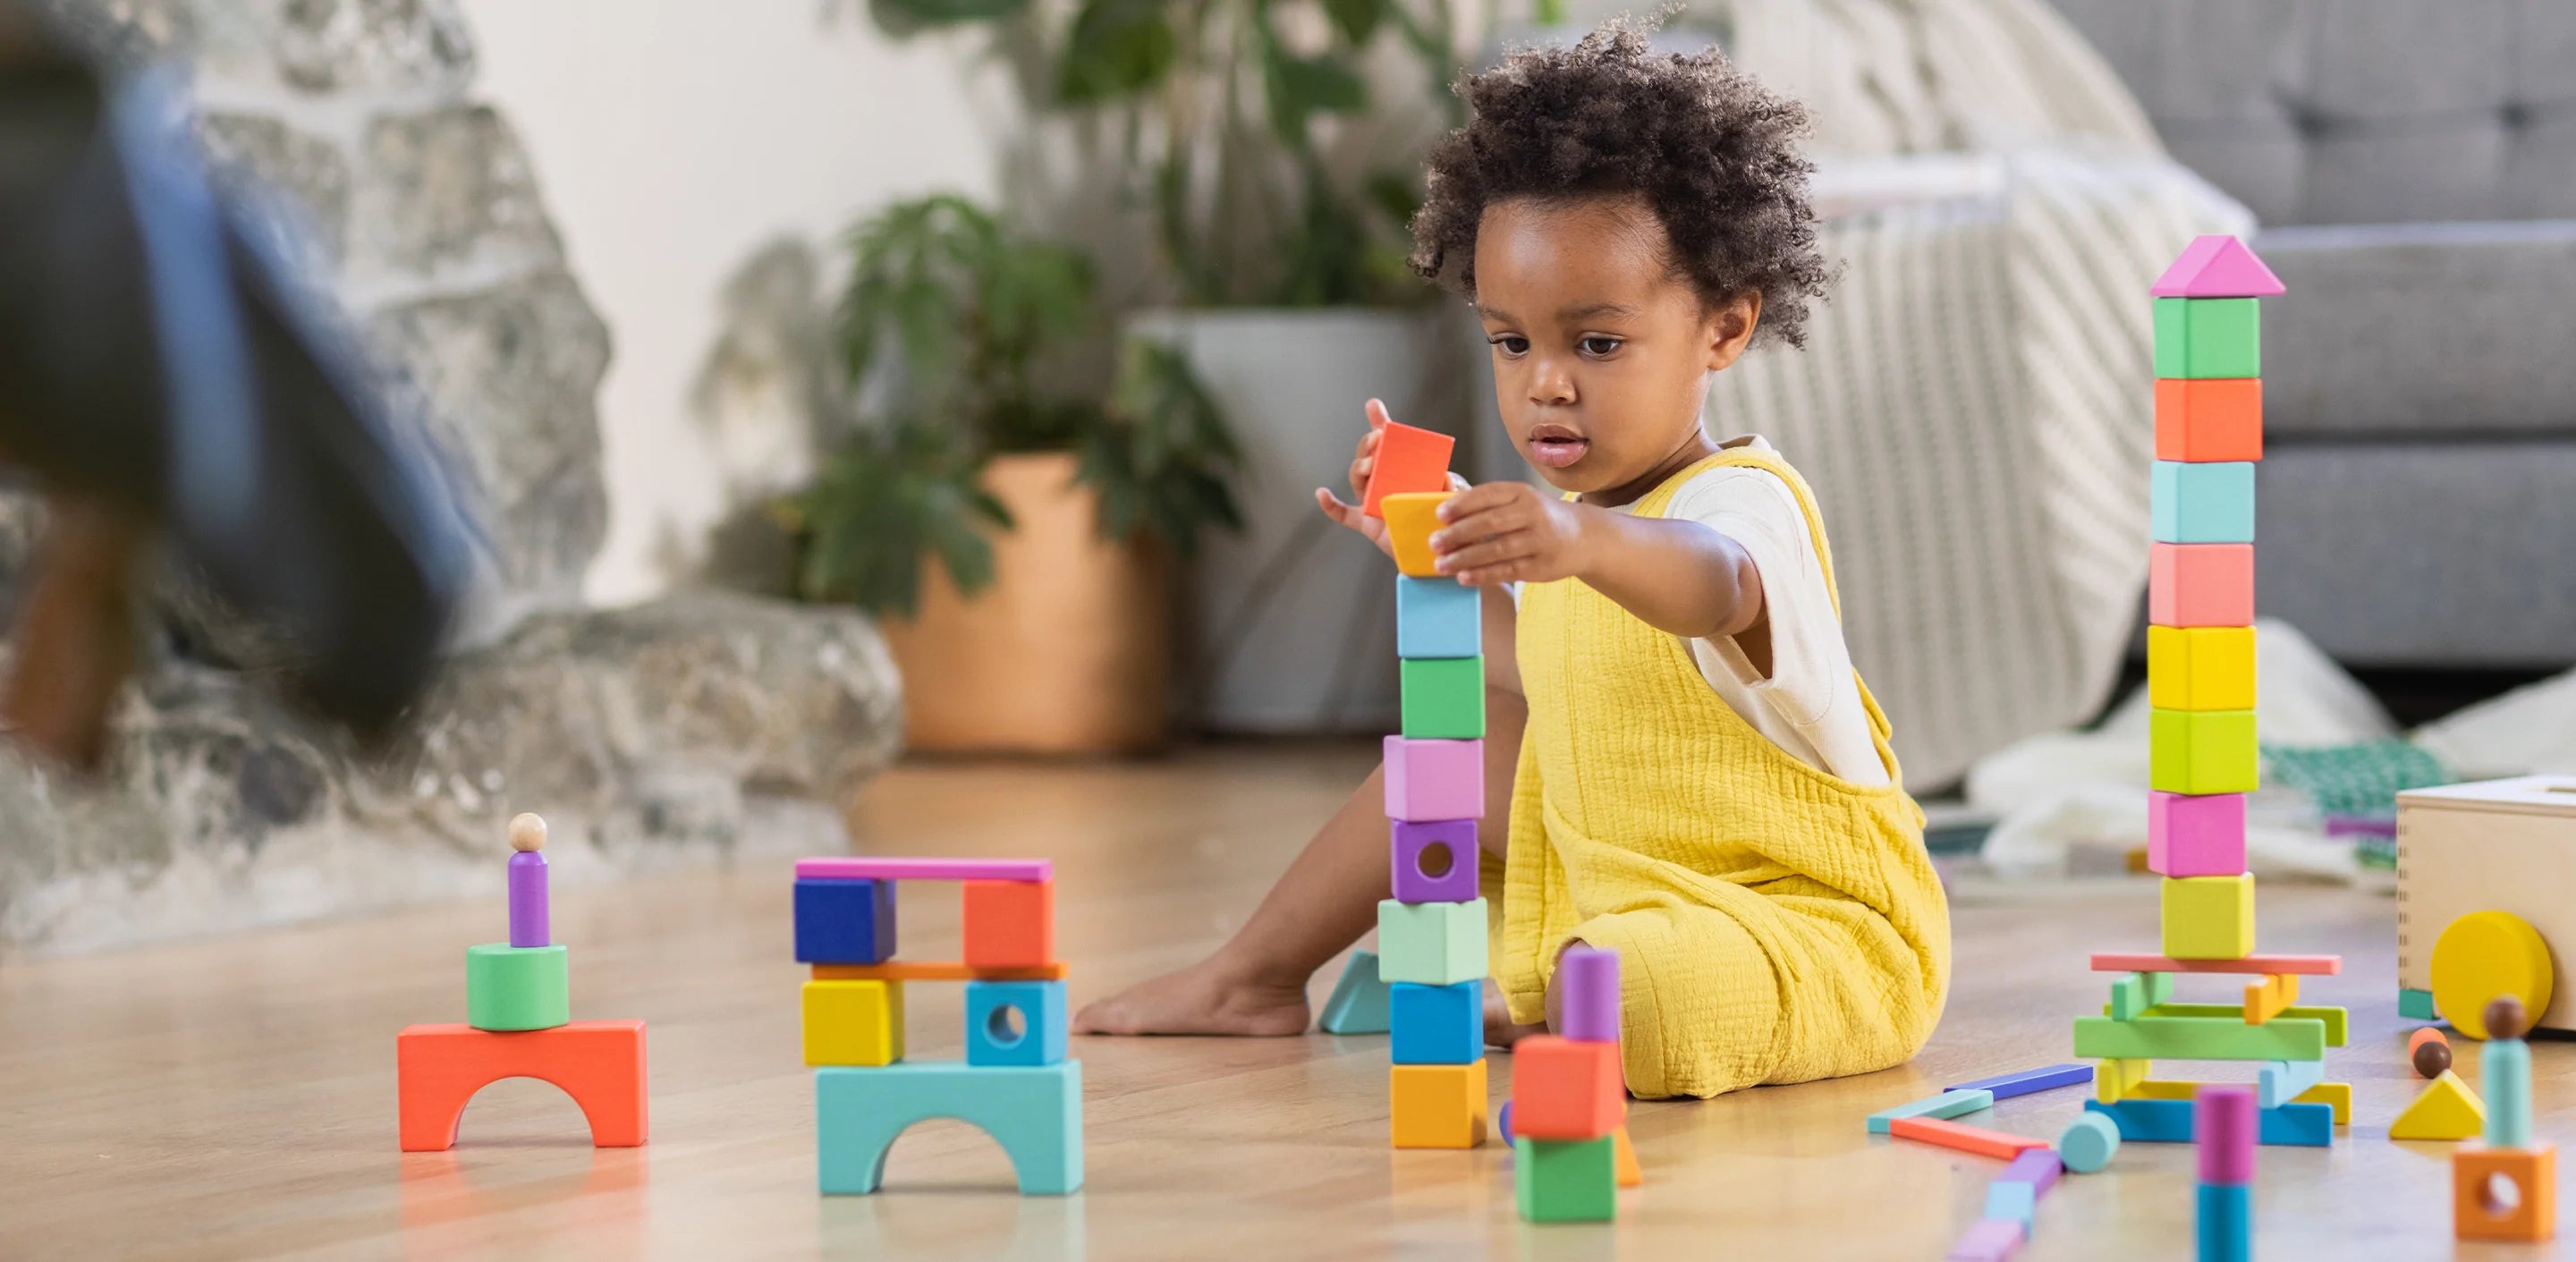 The Helper Play Kit, Toys for 2-Year-Olds